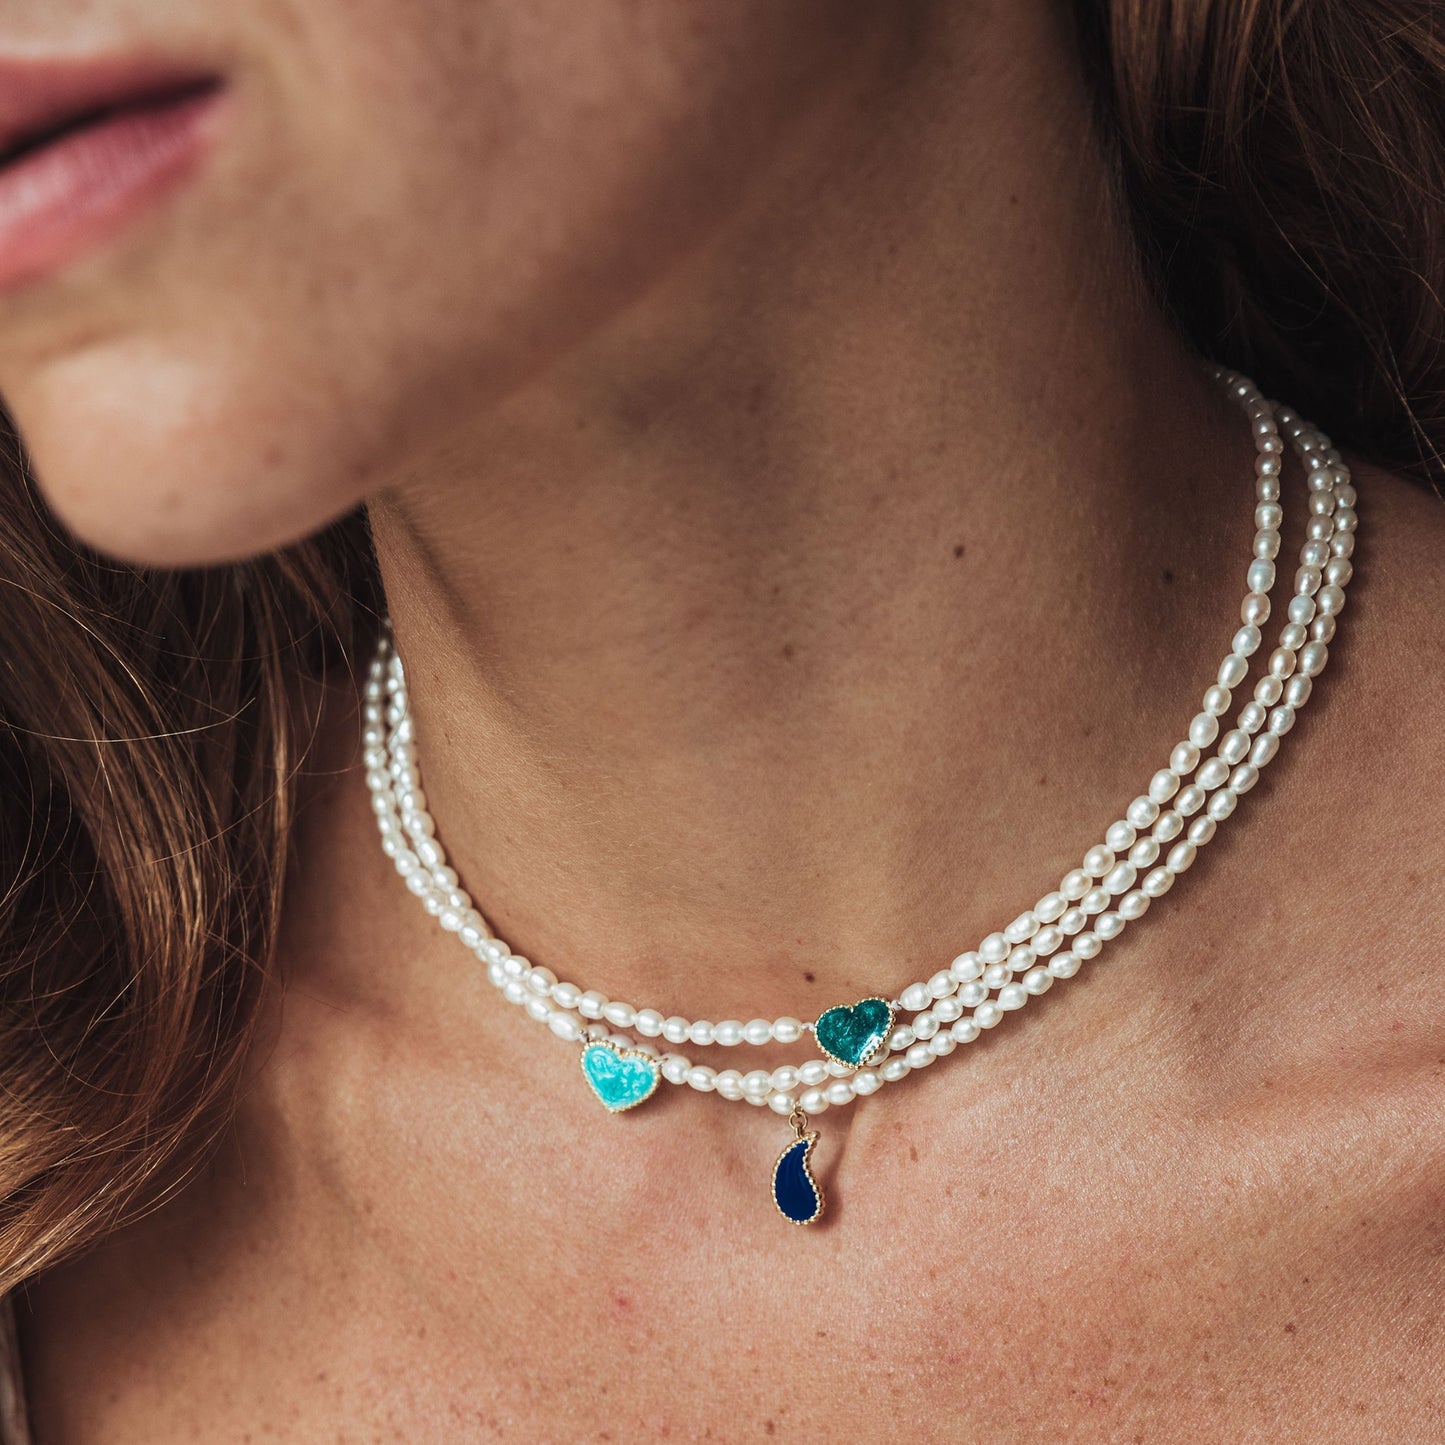 The Pearly Enamel heart necklace in turquoise - Oria.jewelry